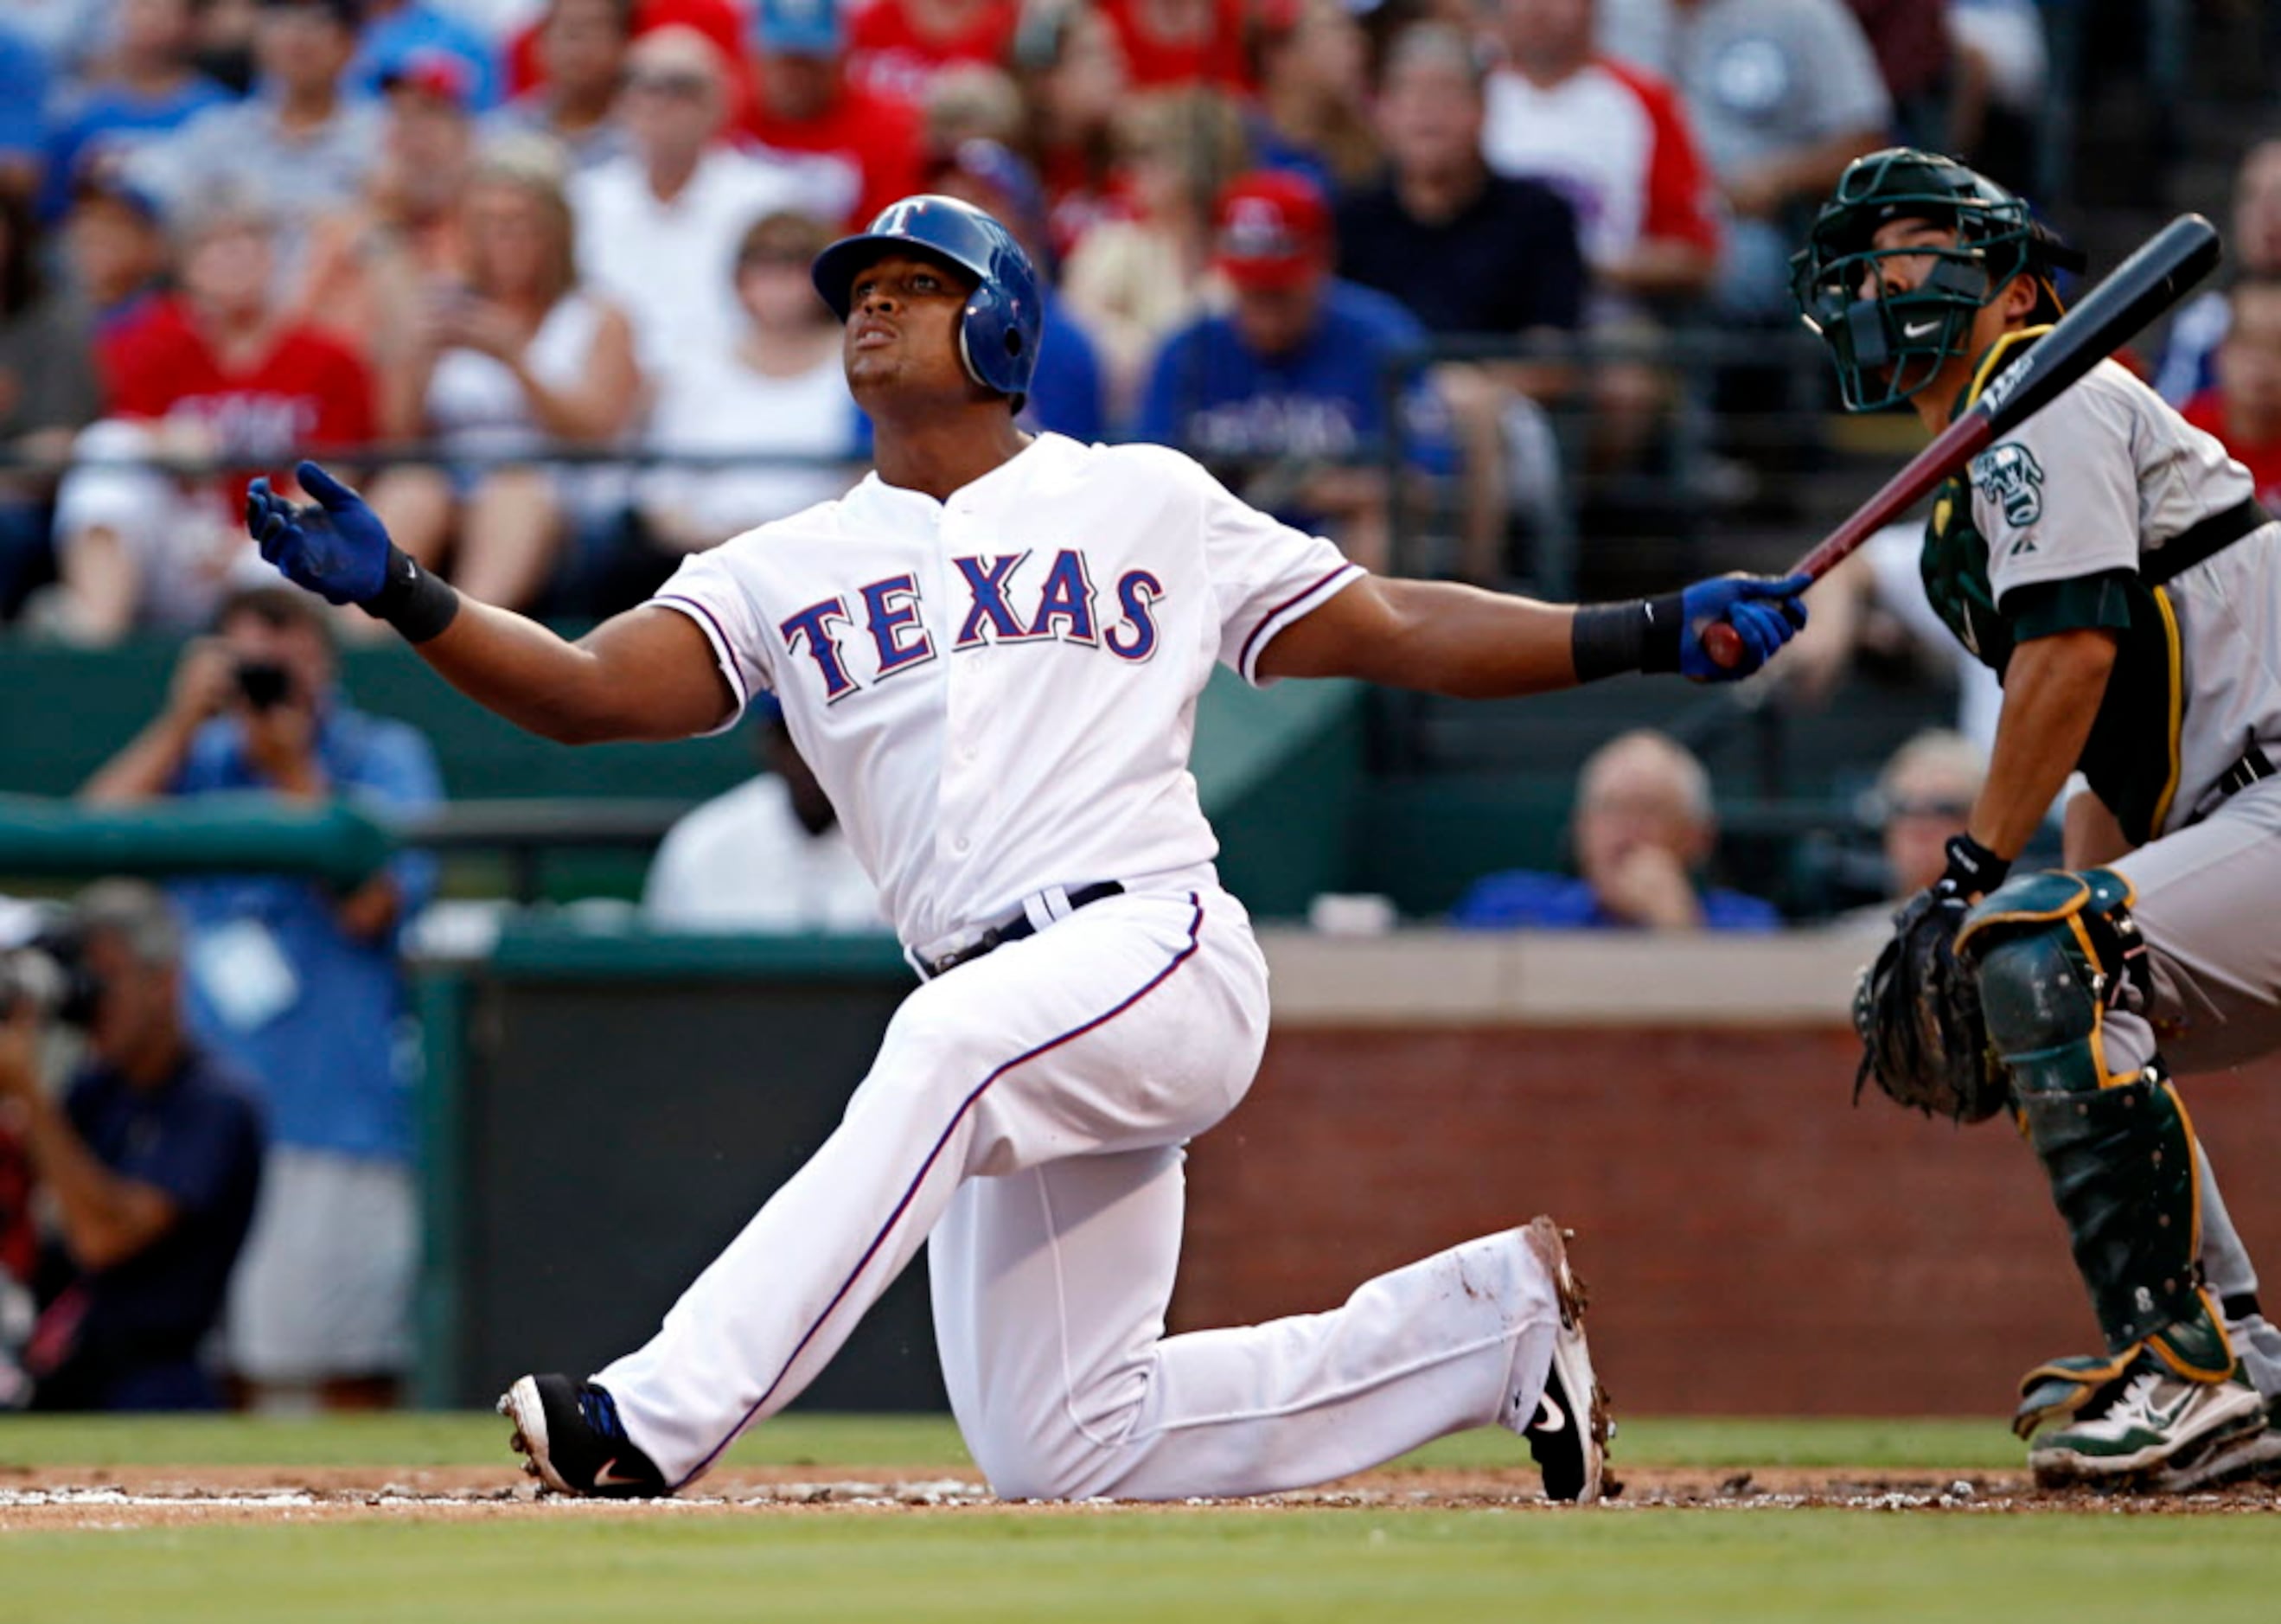 Adrian Beltre is chasing 3,000 hits: A look at how other MLB greats